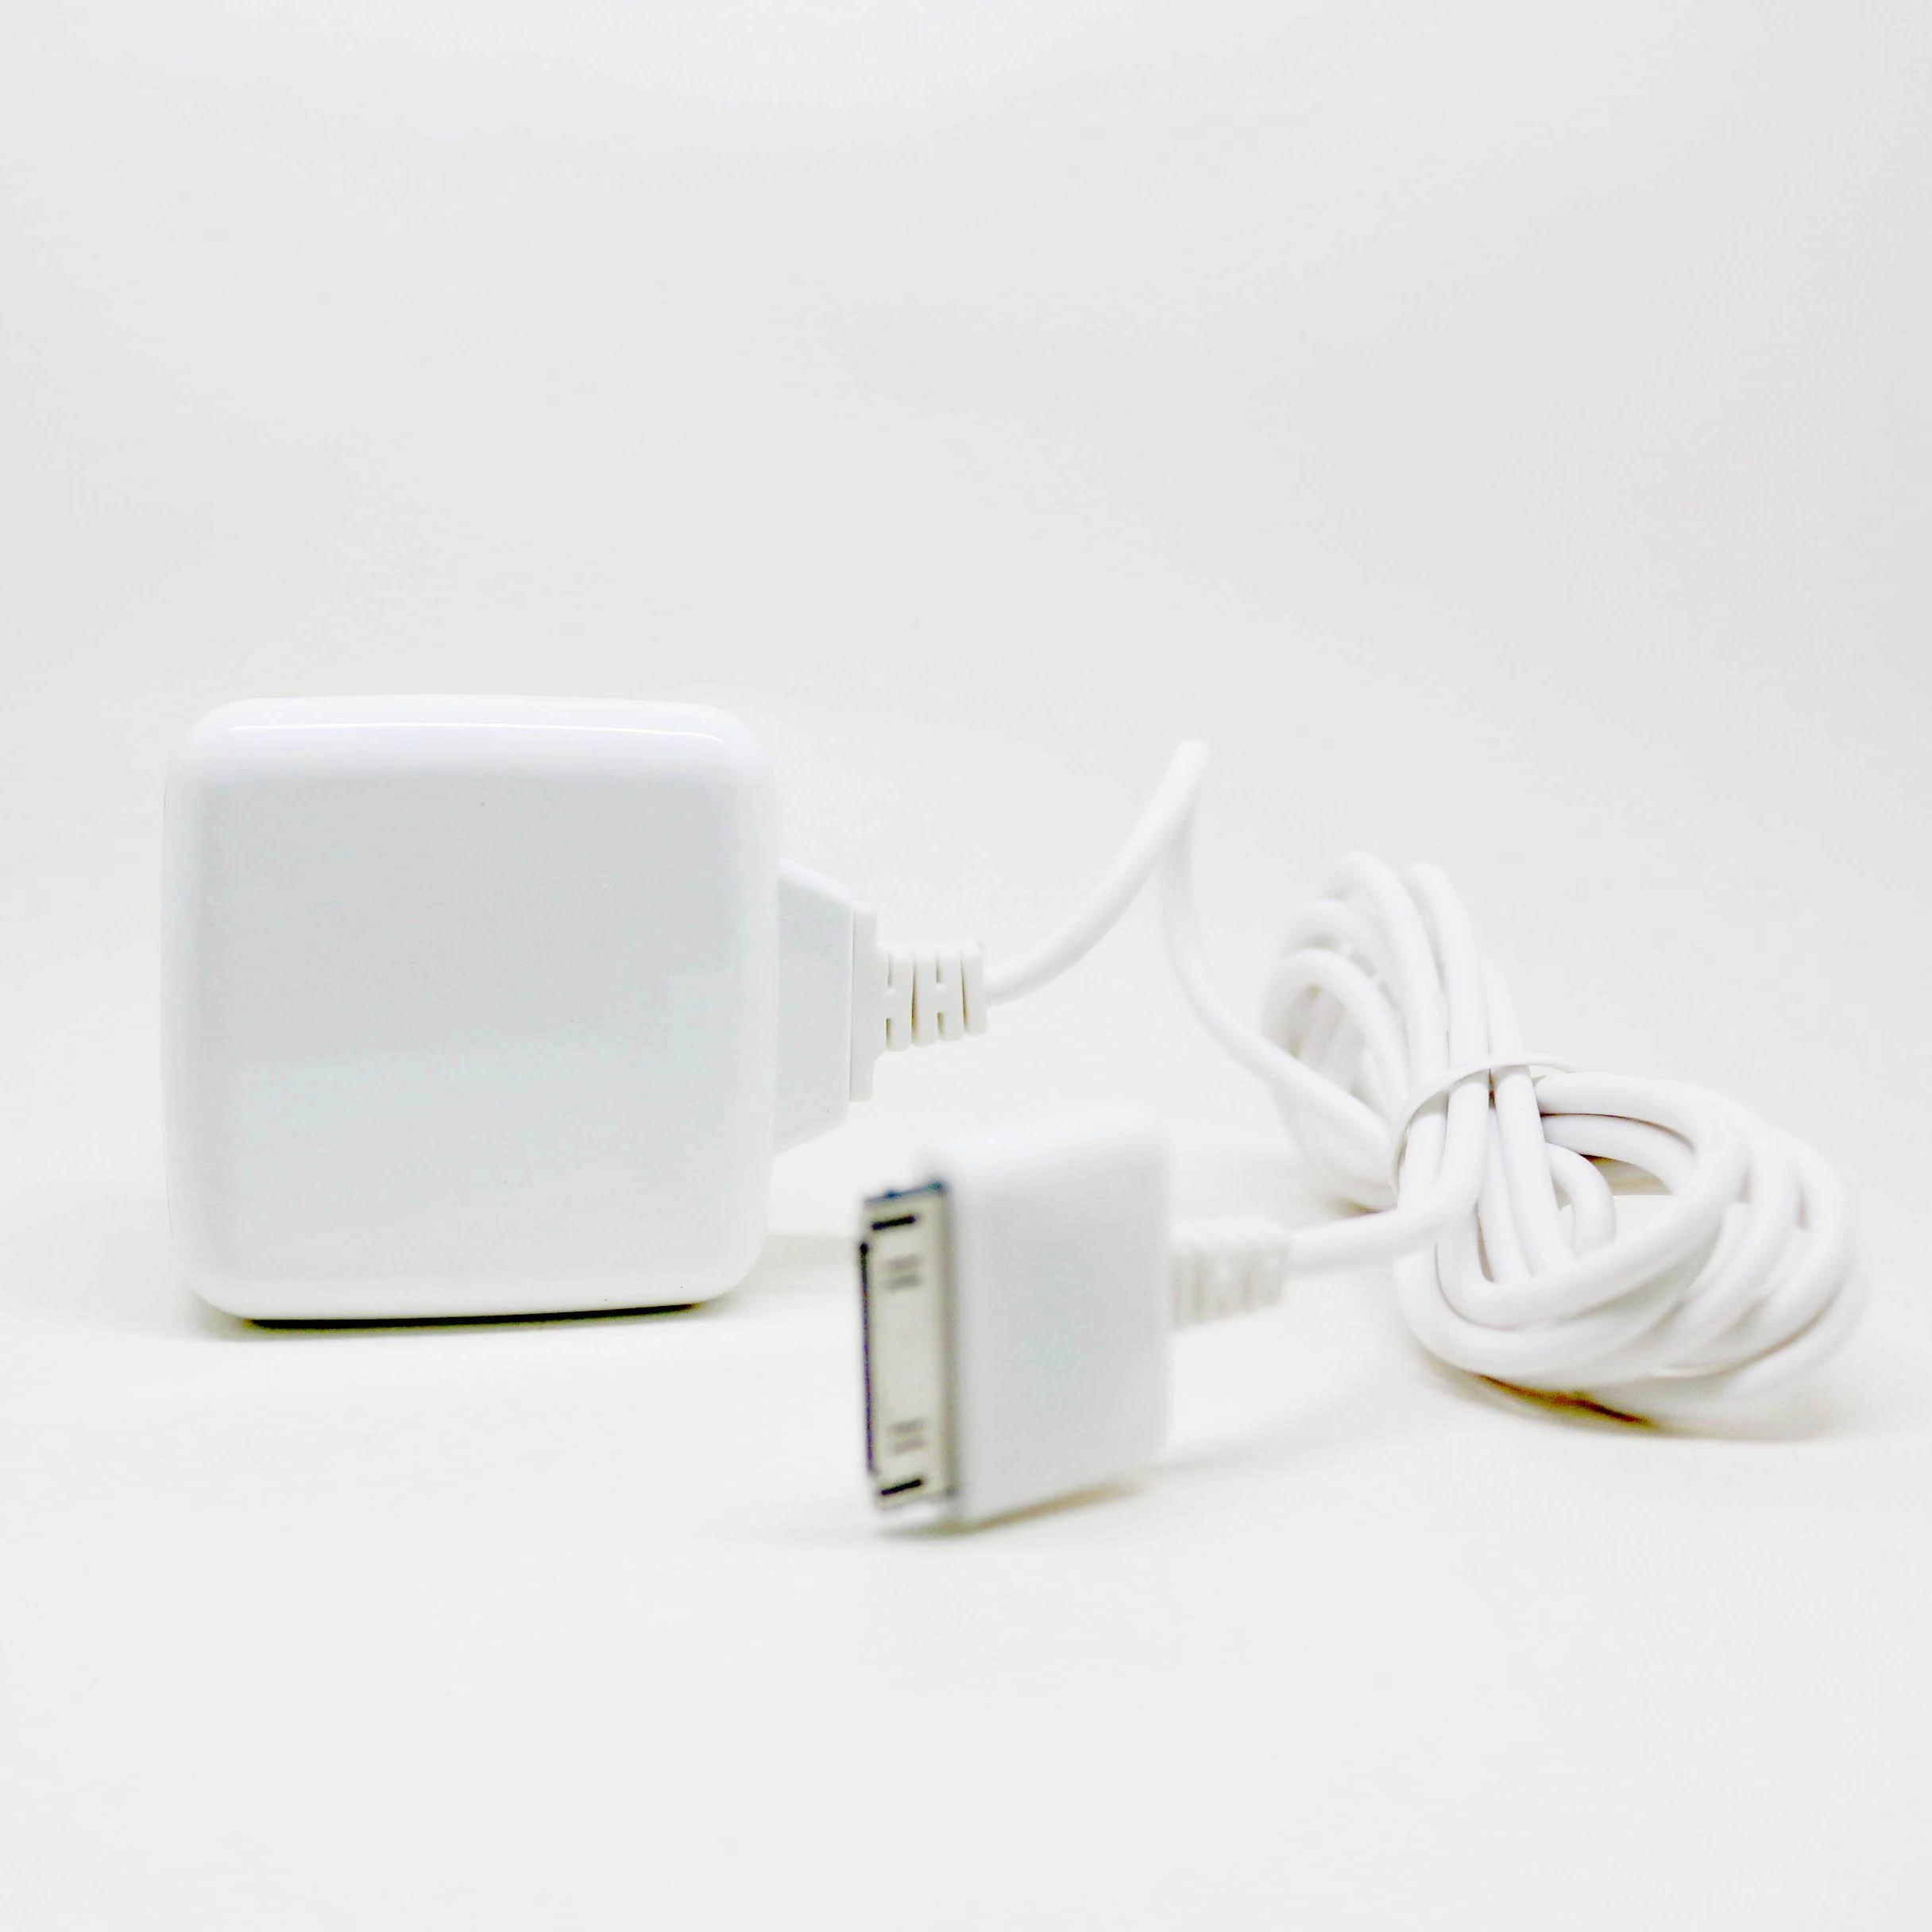 IPHONE 4 TRAVEL CHARGER